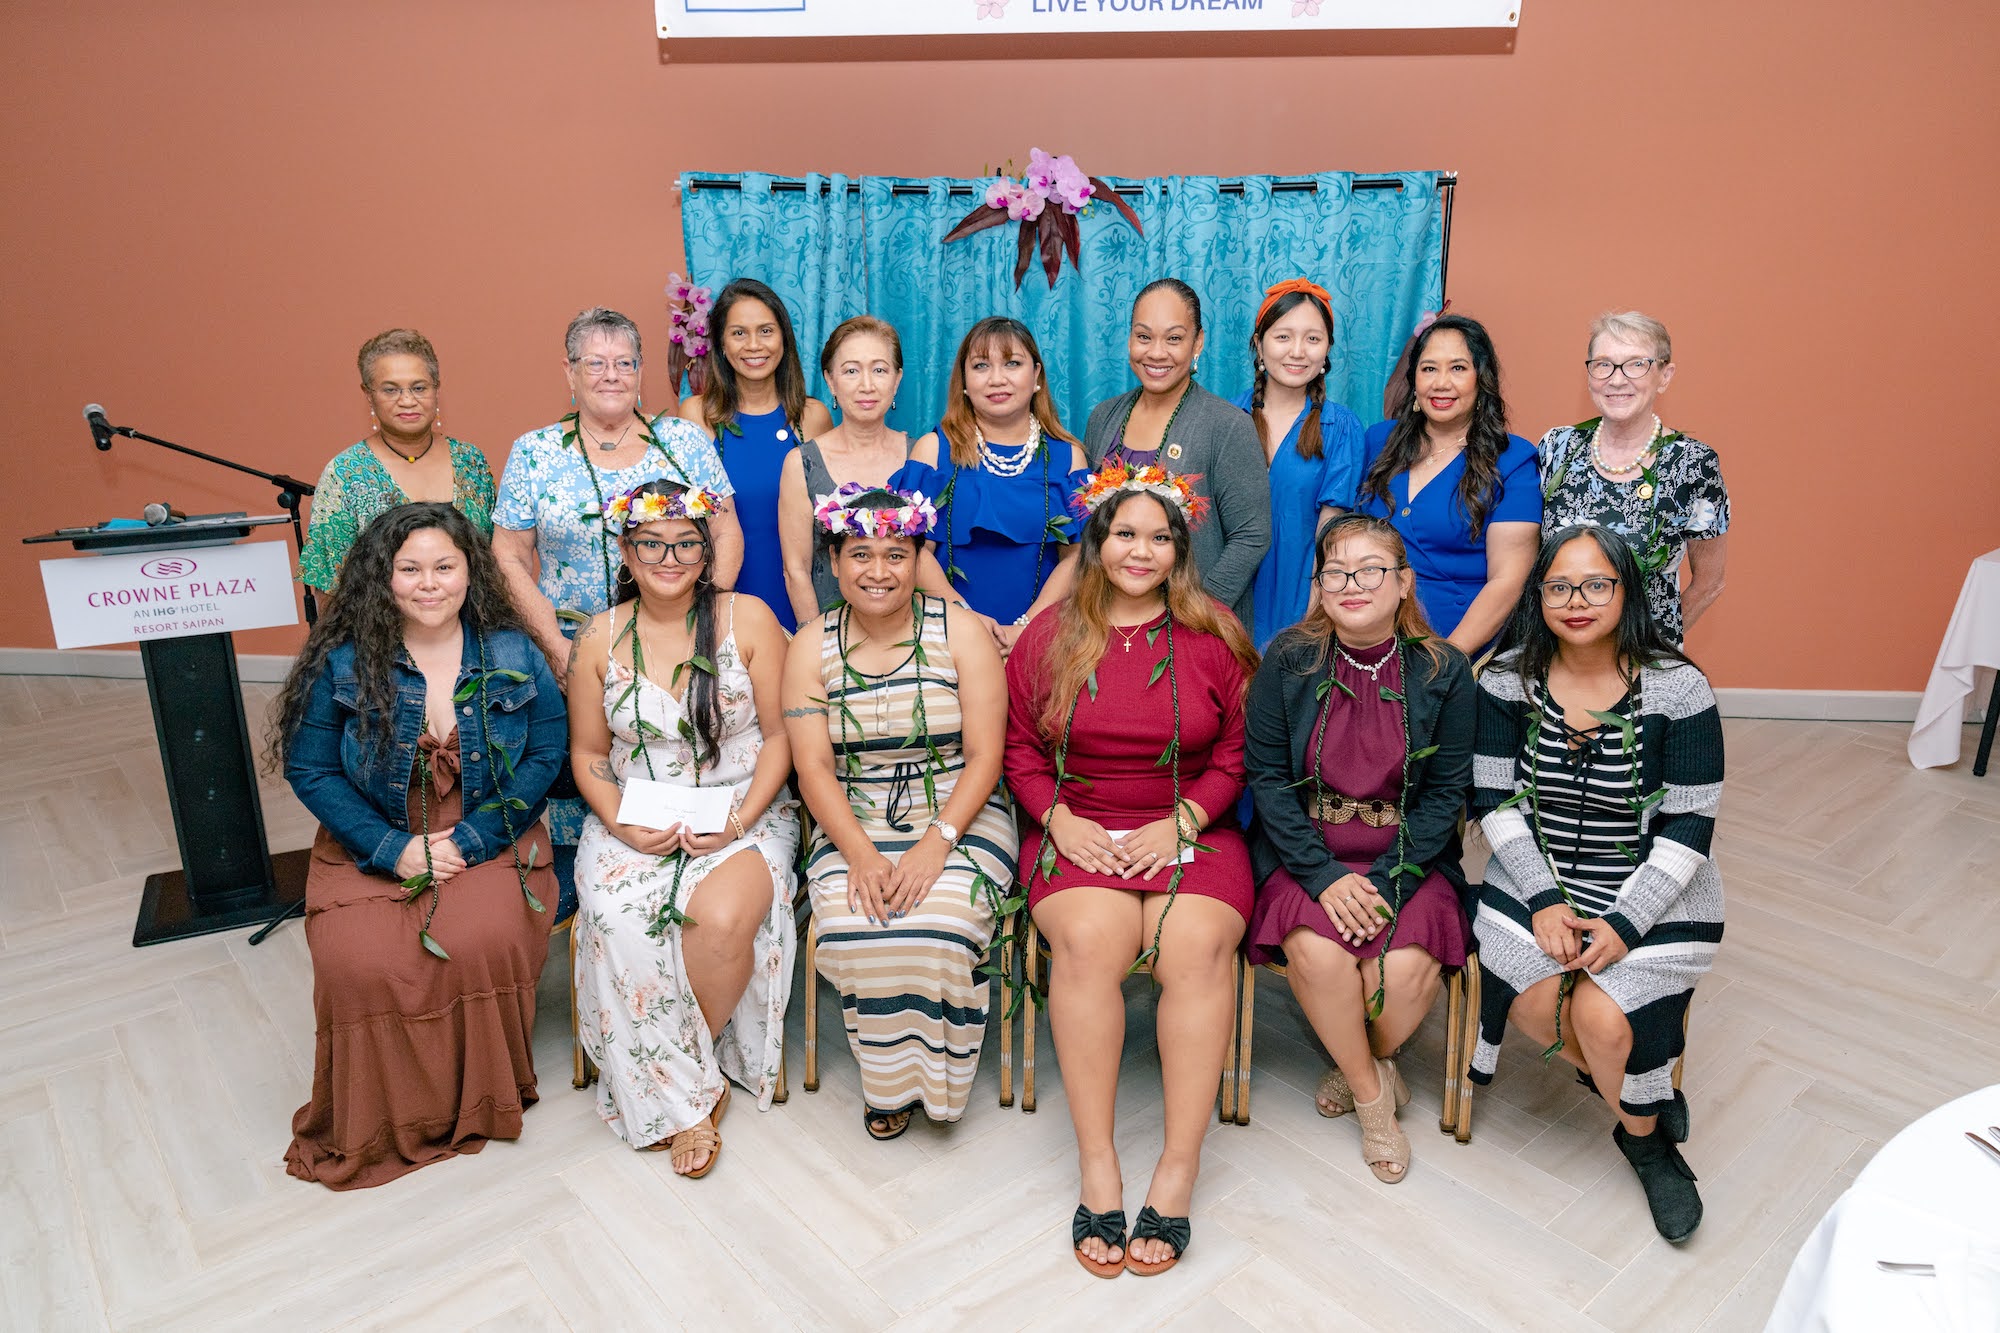 Front, from left, the first “Live Your Dreams” recipient, Leah Murphy, poses with the 2022 Live Your Dreams recipients Jennifer Benavente, Mollie Atinisom, Angellyn Nicholas, Maritoni Duarte, and Kelly Sablan. At the back, from left, are Soroptimist International Northern Mariana Islands past president Marilyn Marron, SINMI president Maureen Sebangiol, treasurer Merle Byrd, Suzi Perez, Soroptimist Live Your Dreams chair Jessy Loomis, president of Soroptimist Marianas Jessica Castro, SINMI member Yijia Zhao, Joann Aquino and secretary Pam Brown Blackburn.